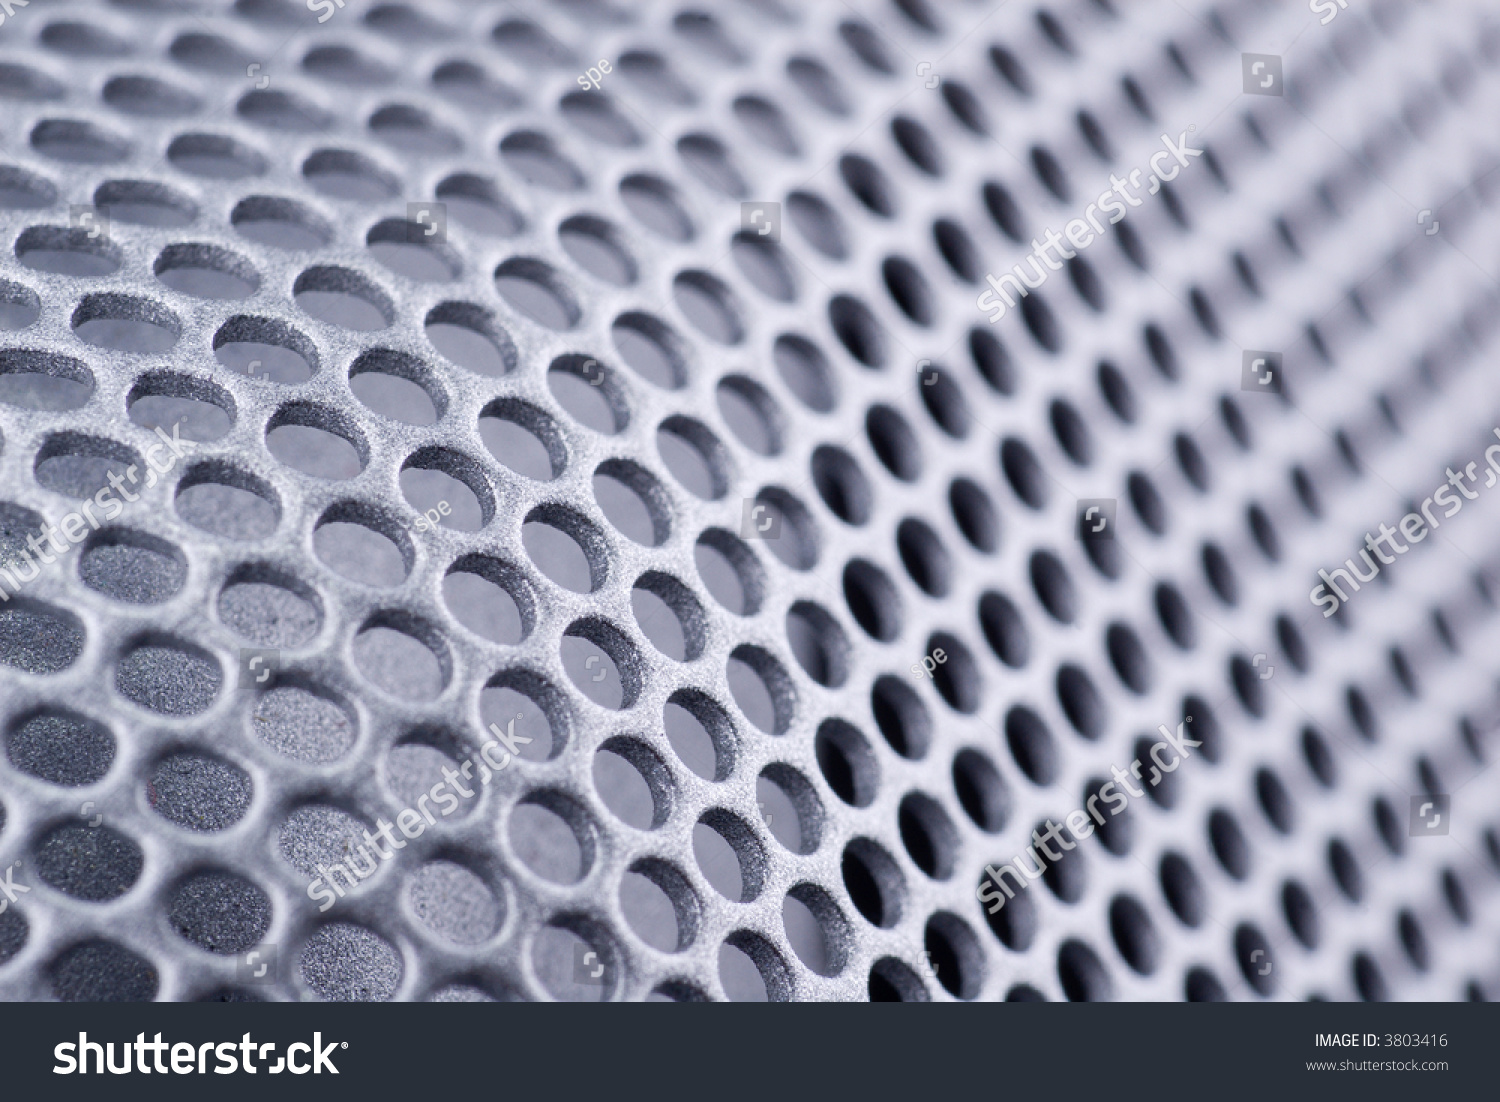 Curved Metal Sheet Perforated Texture Stock Photo 3803416 : Shutterstock